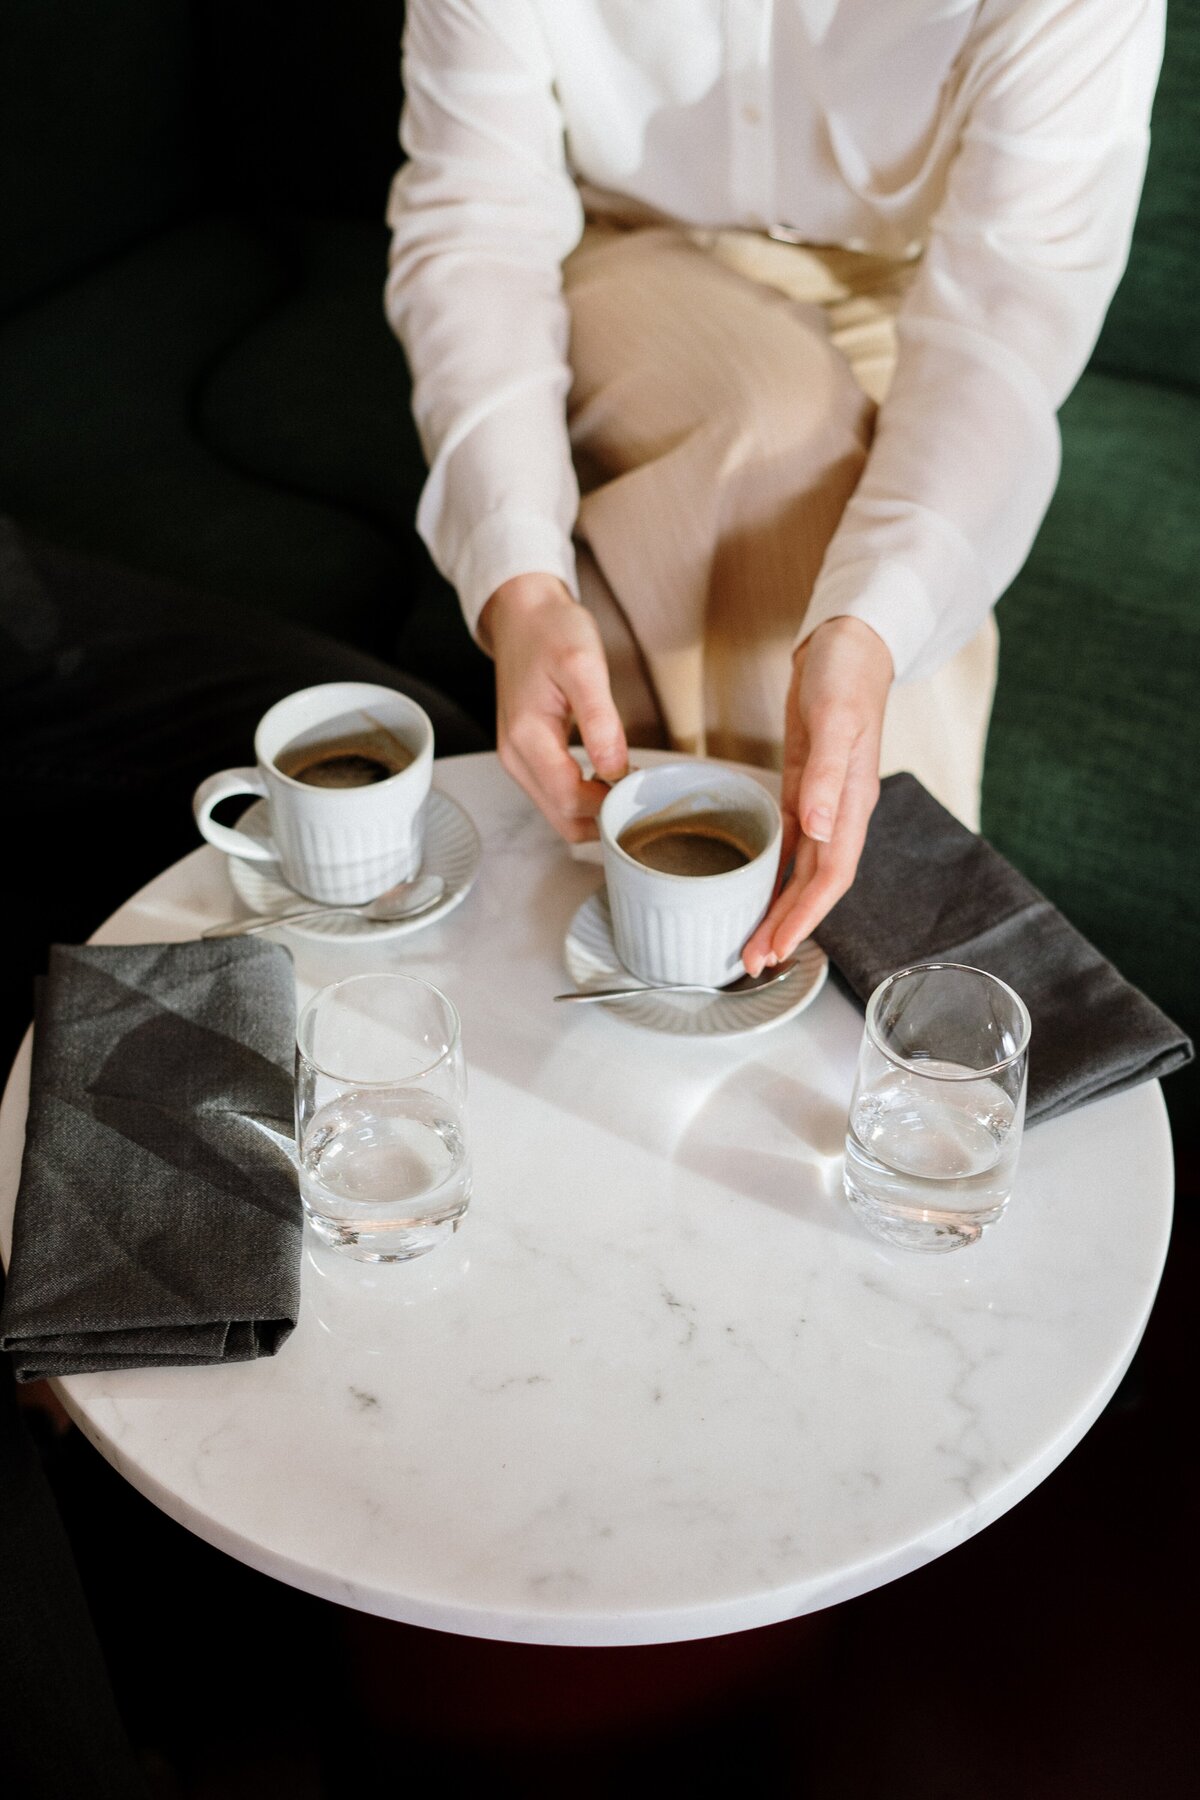 person-holding-white-ceramic-cup-on-white-table-4255416